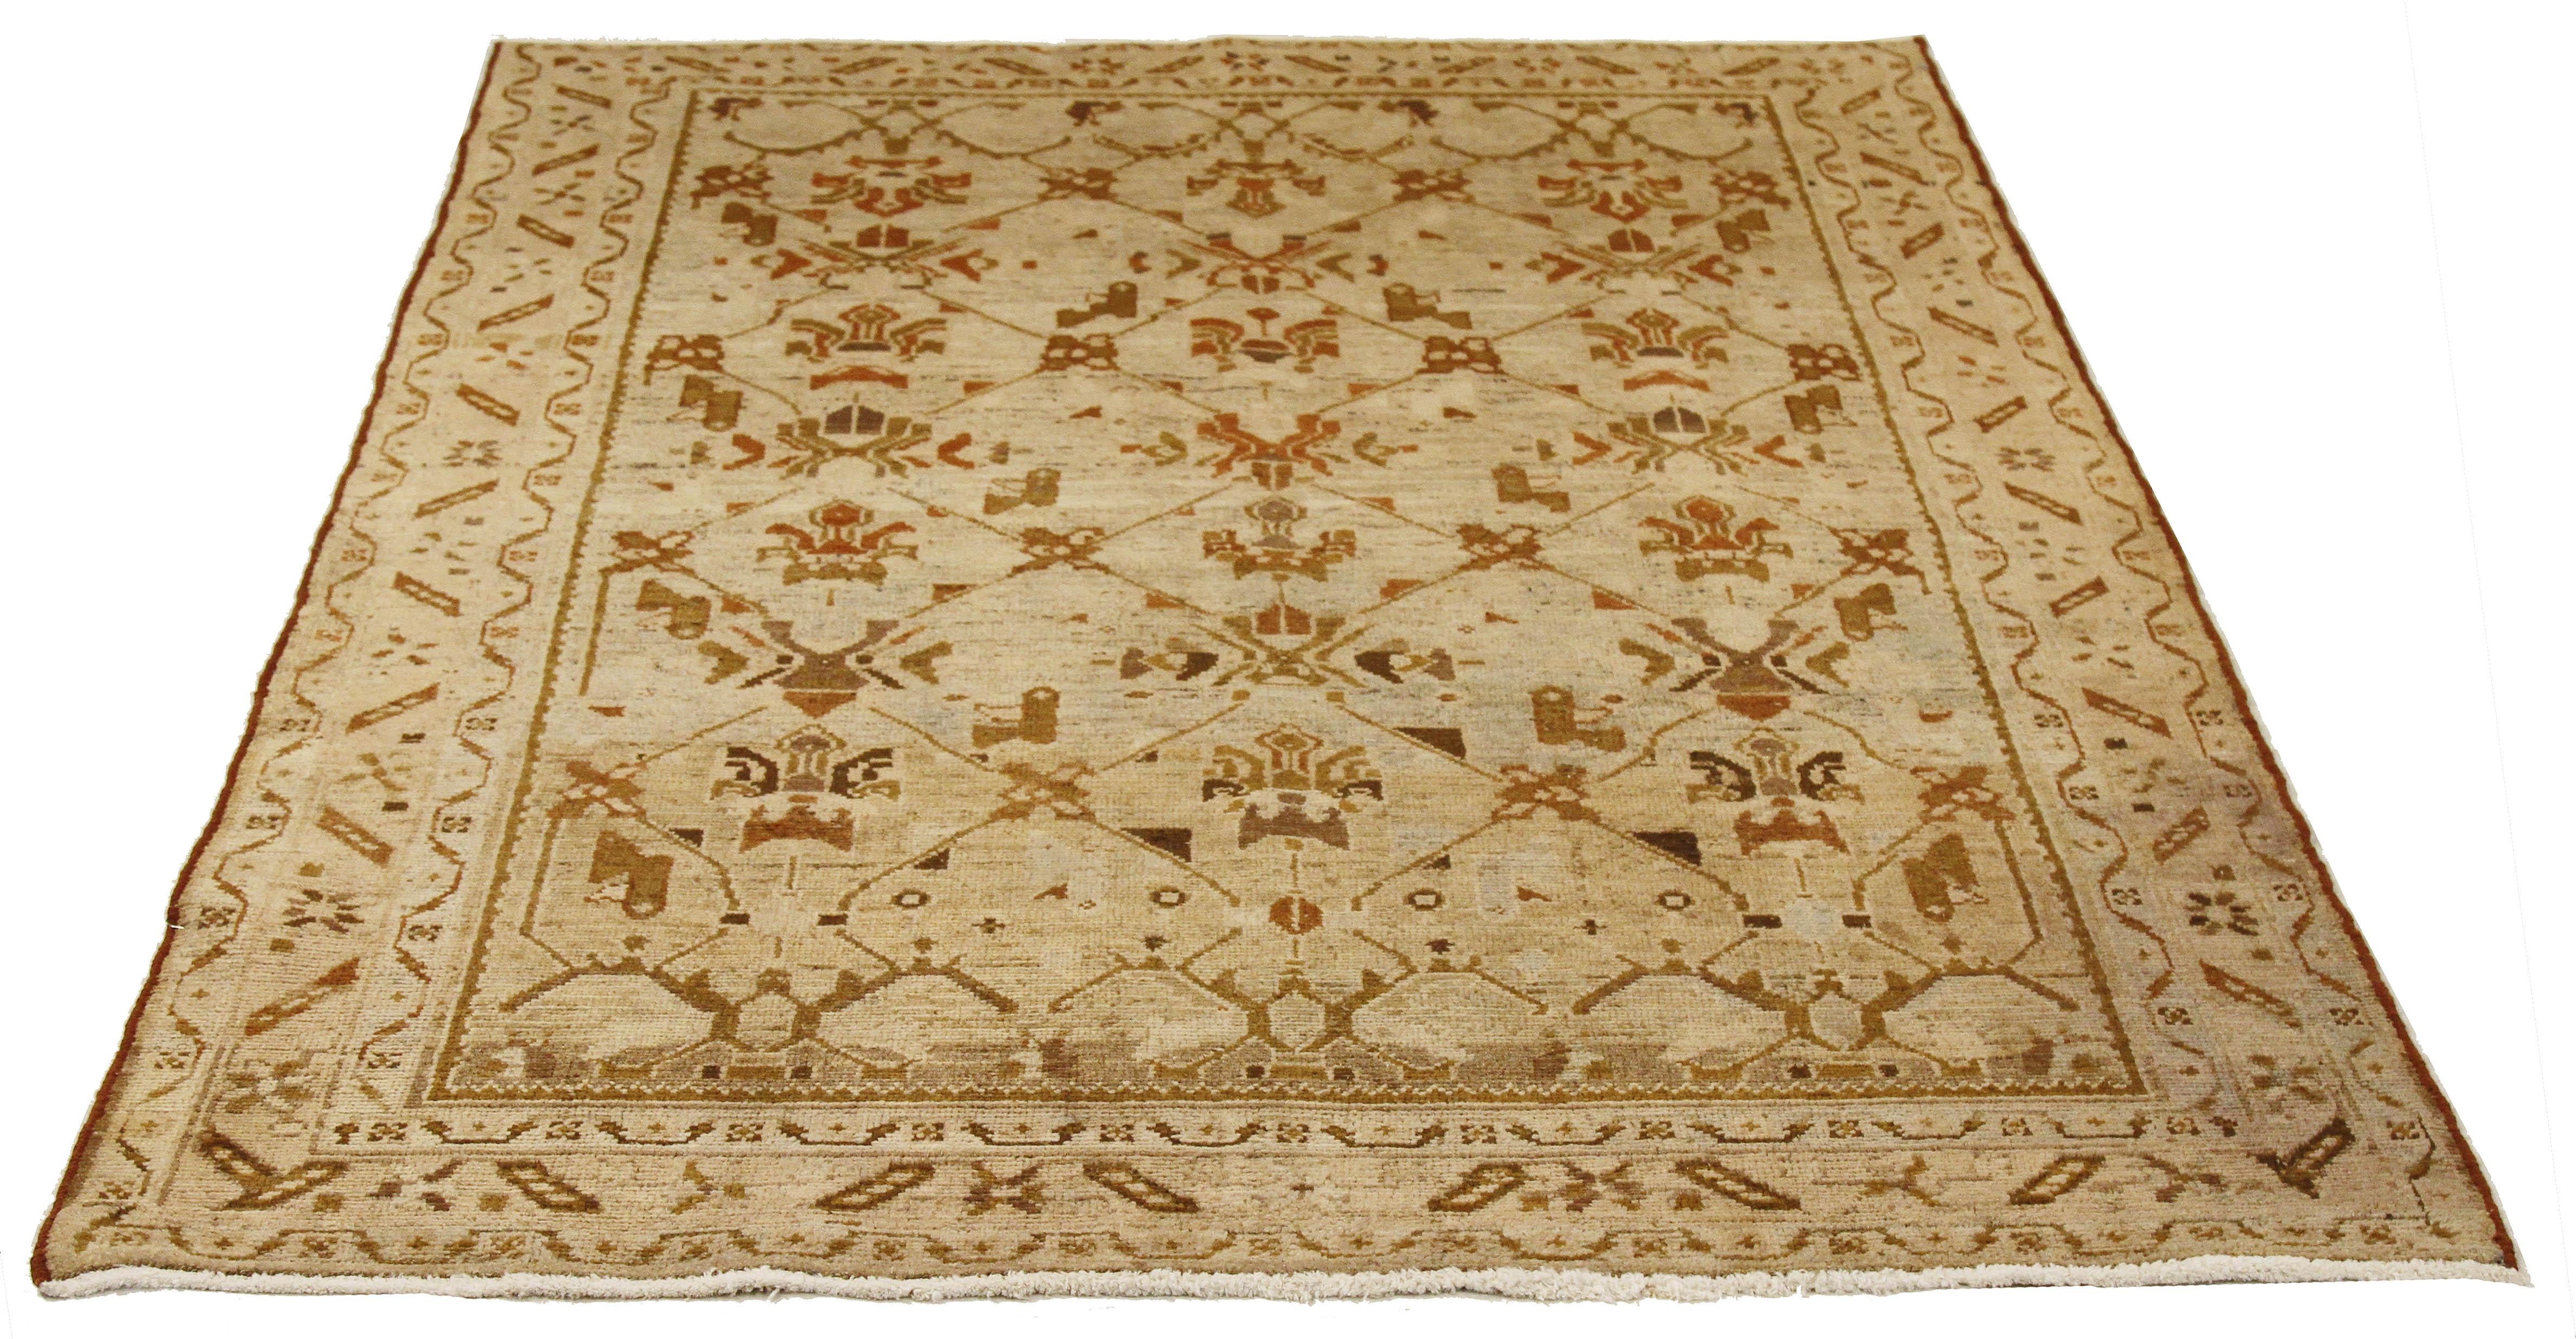 Antique Persian rug handwoven from the finest sheep’s wool and colored with all-natural vegetable dyes that are safe for humans and pets. It’s a traditional Malayer design featuring green and brown botanical details all-over an ivory field. It’s a